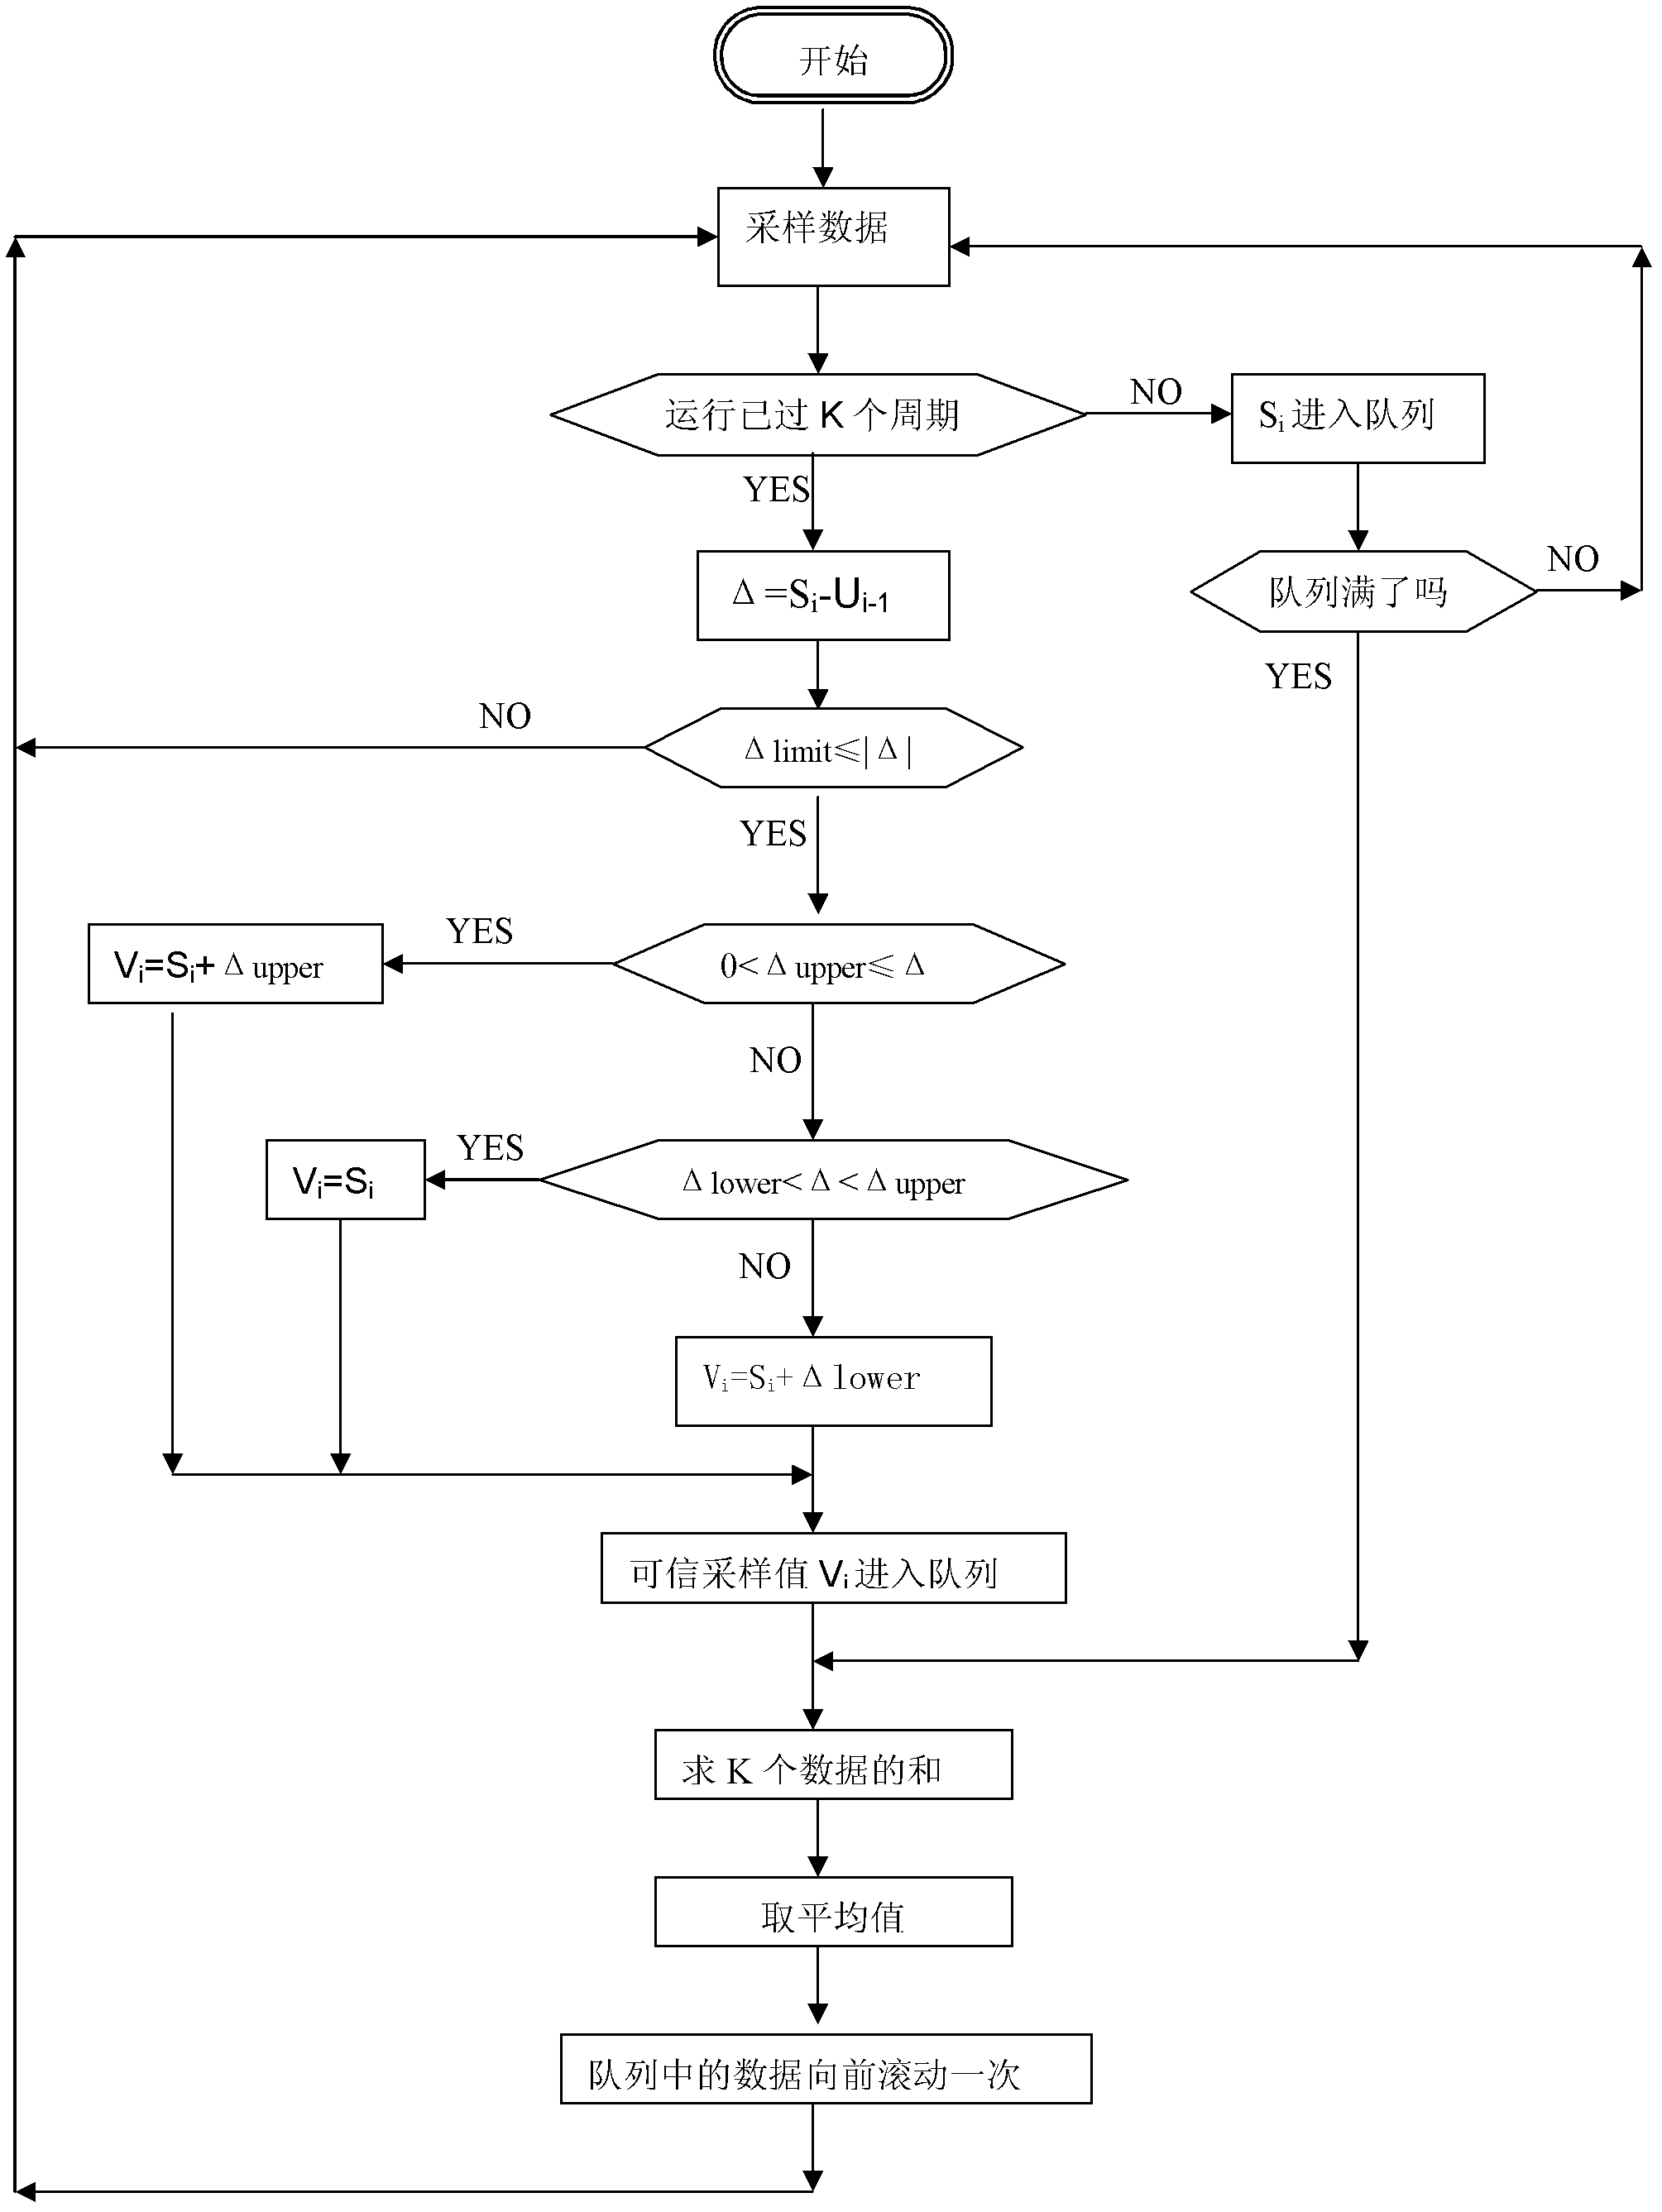 Method for post-processing measured data by using scrolling smoothing filtering